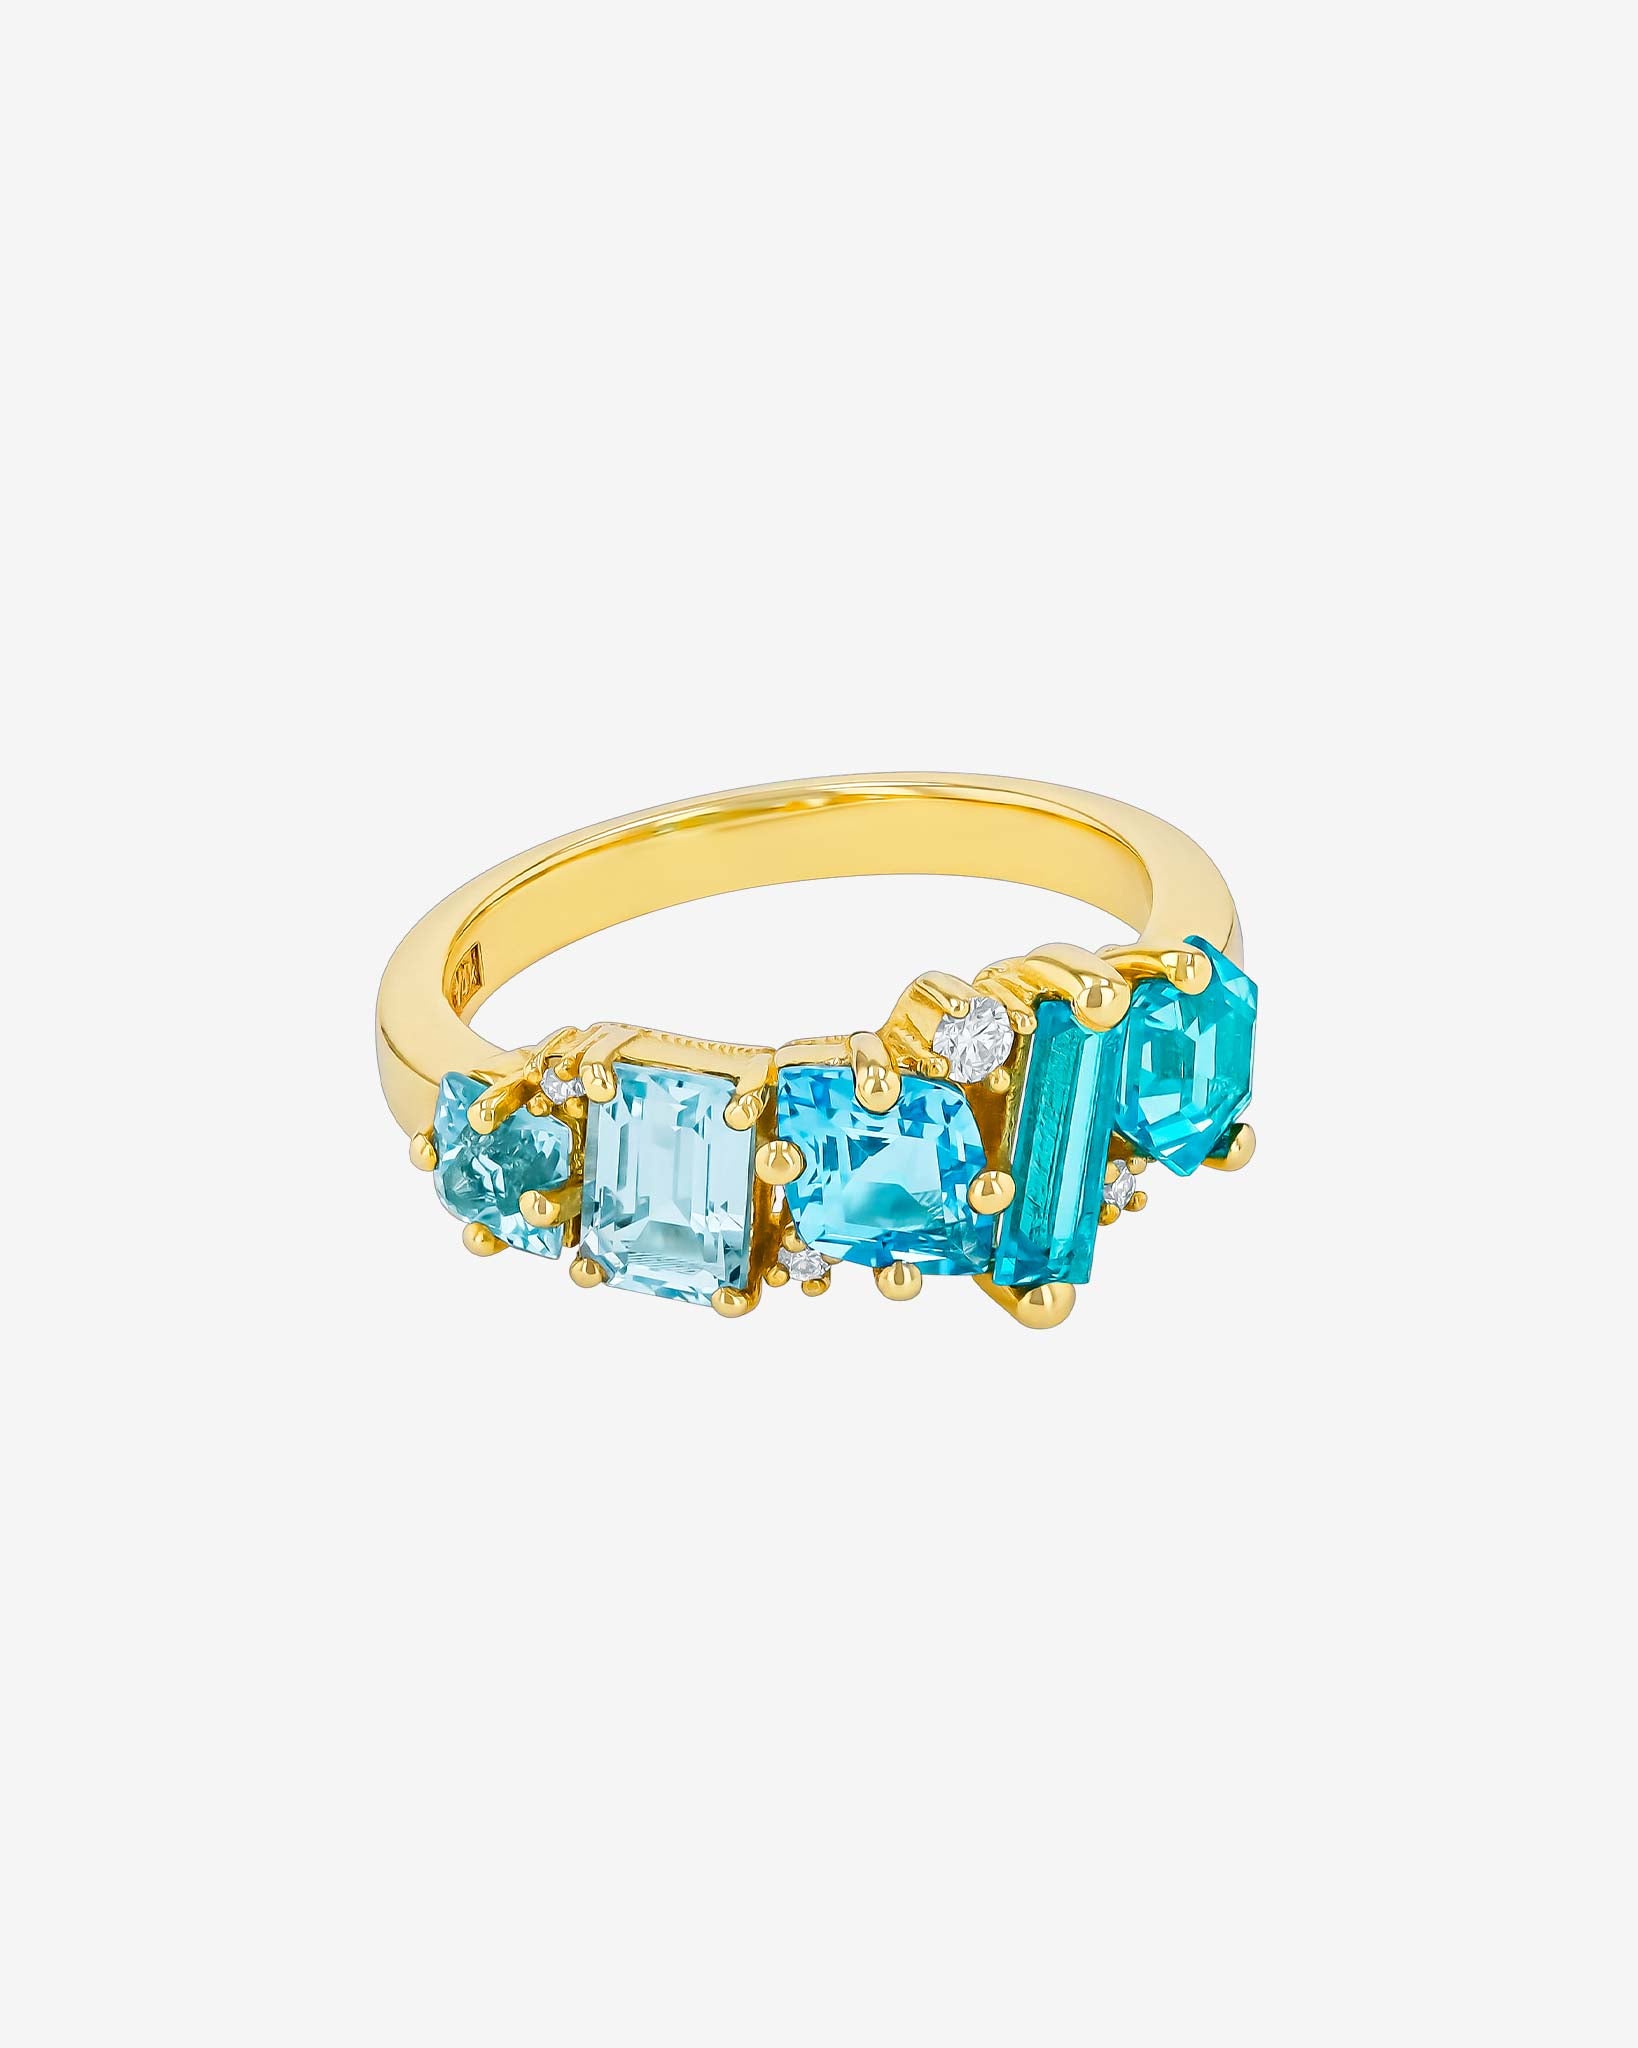 Kalan By Suzanne Kalan Nadima Light Blue Ombre Glimmer Ring in 14k yellow gold